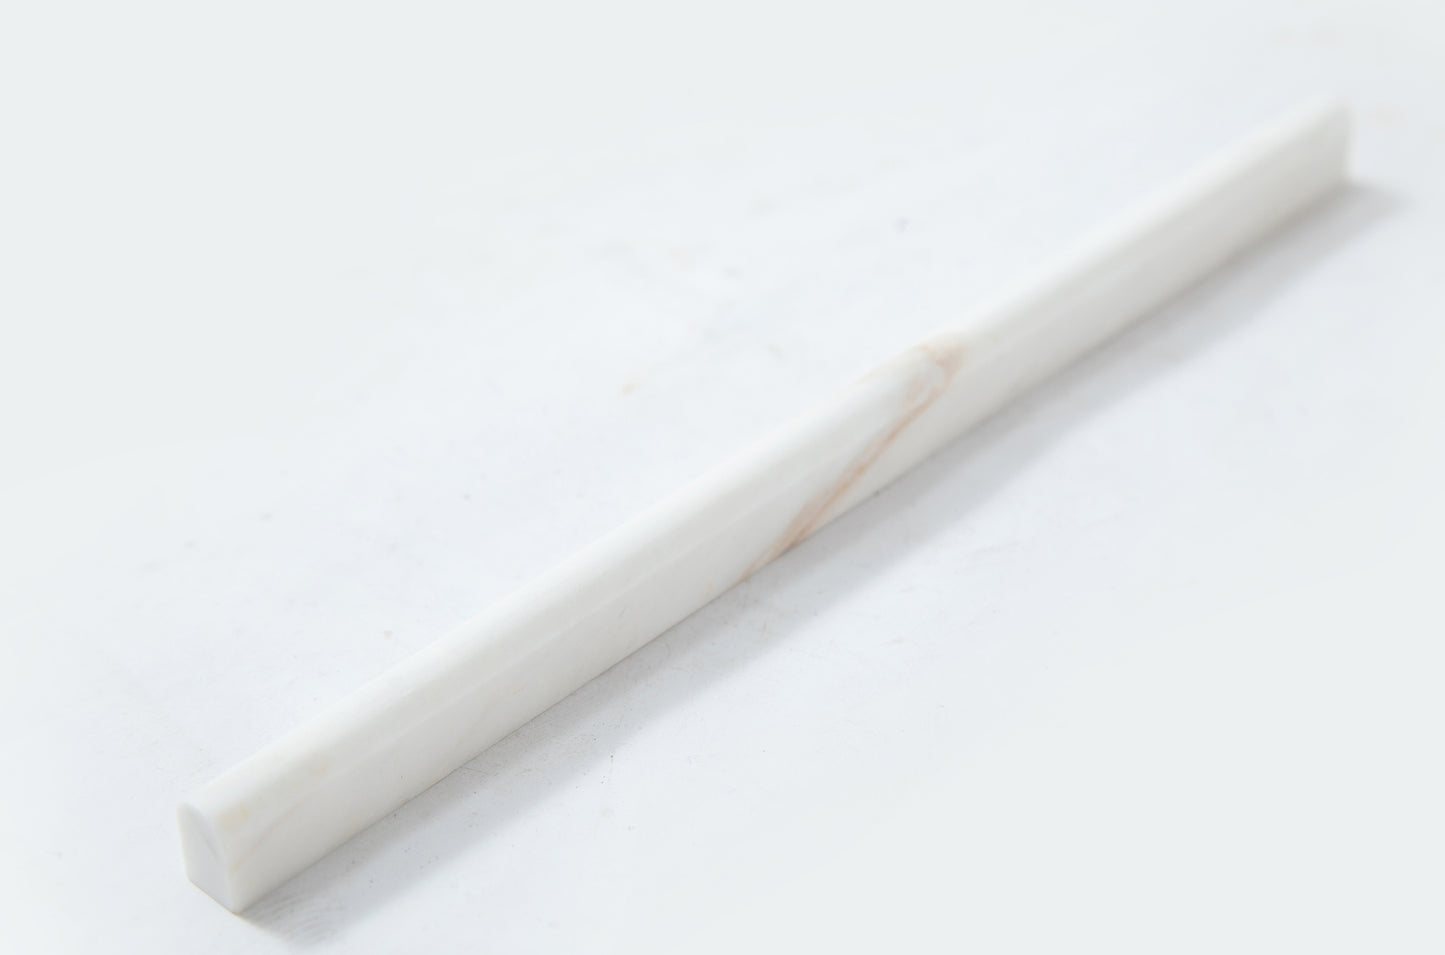 Wooden Vein Marble Molding Polished 1/2" x 12" Pencil Liner